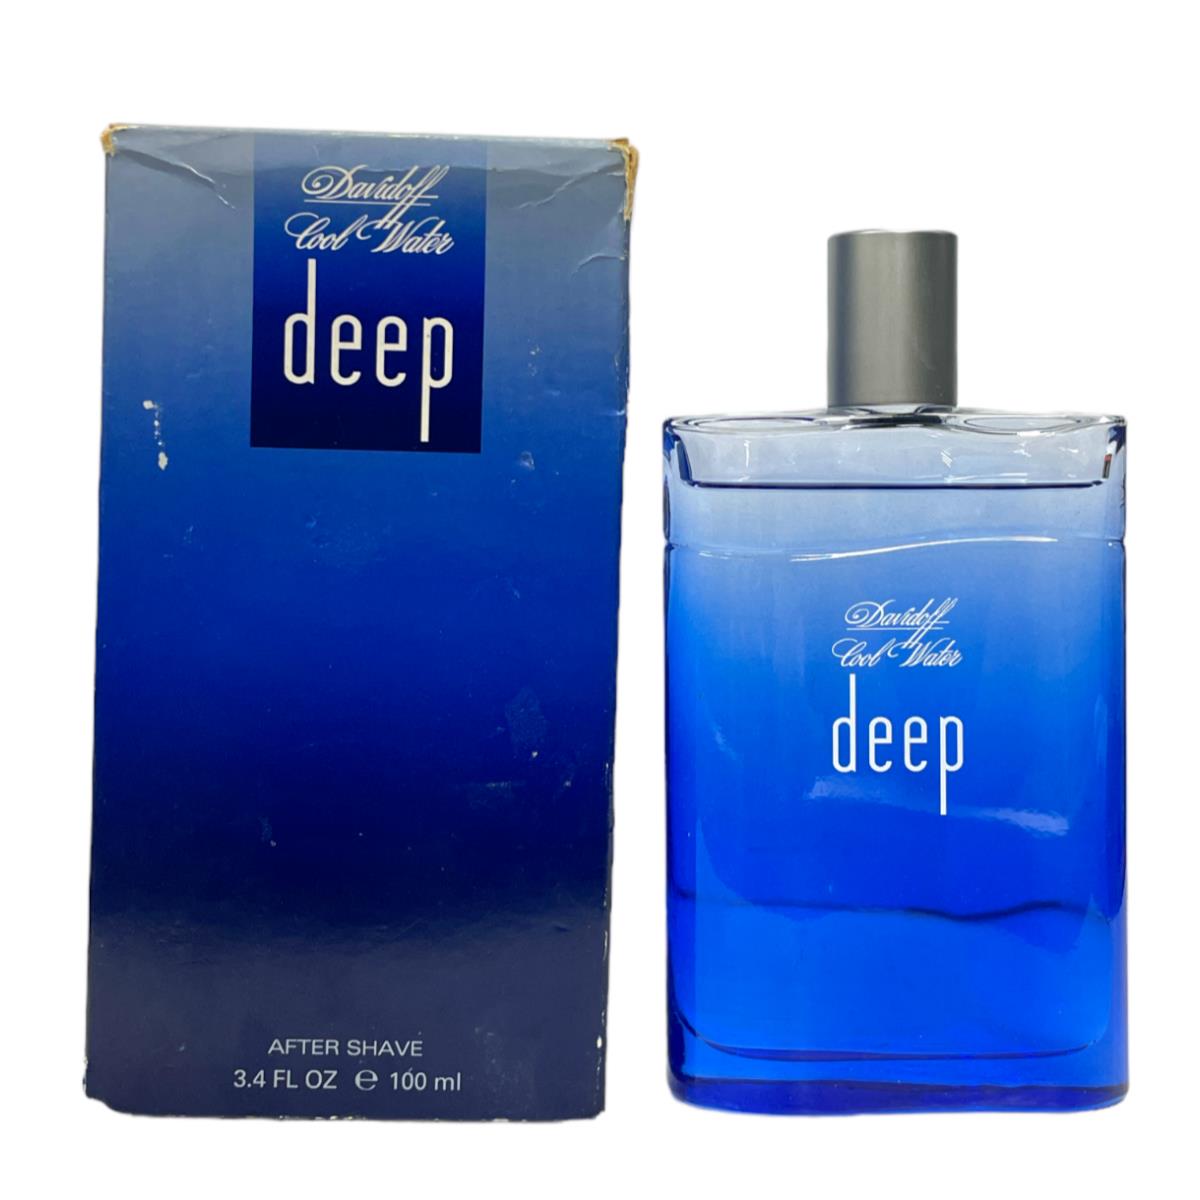 Davidoff Cool Water Deep After Shave 3.4oz / 100mL Rare Find See Pics